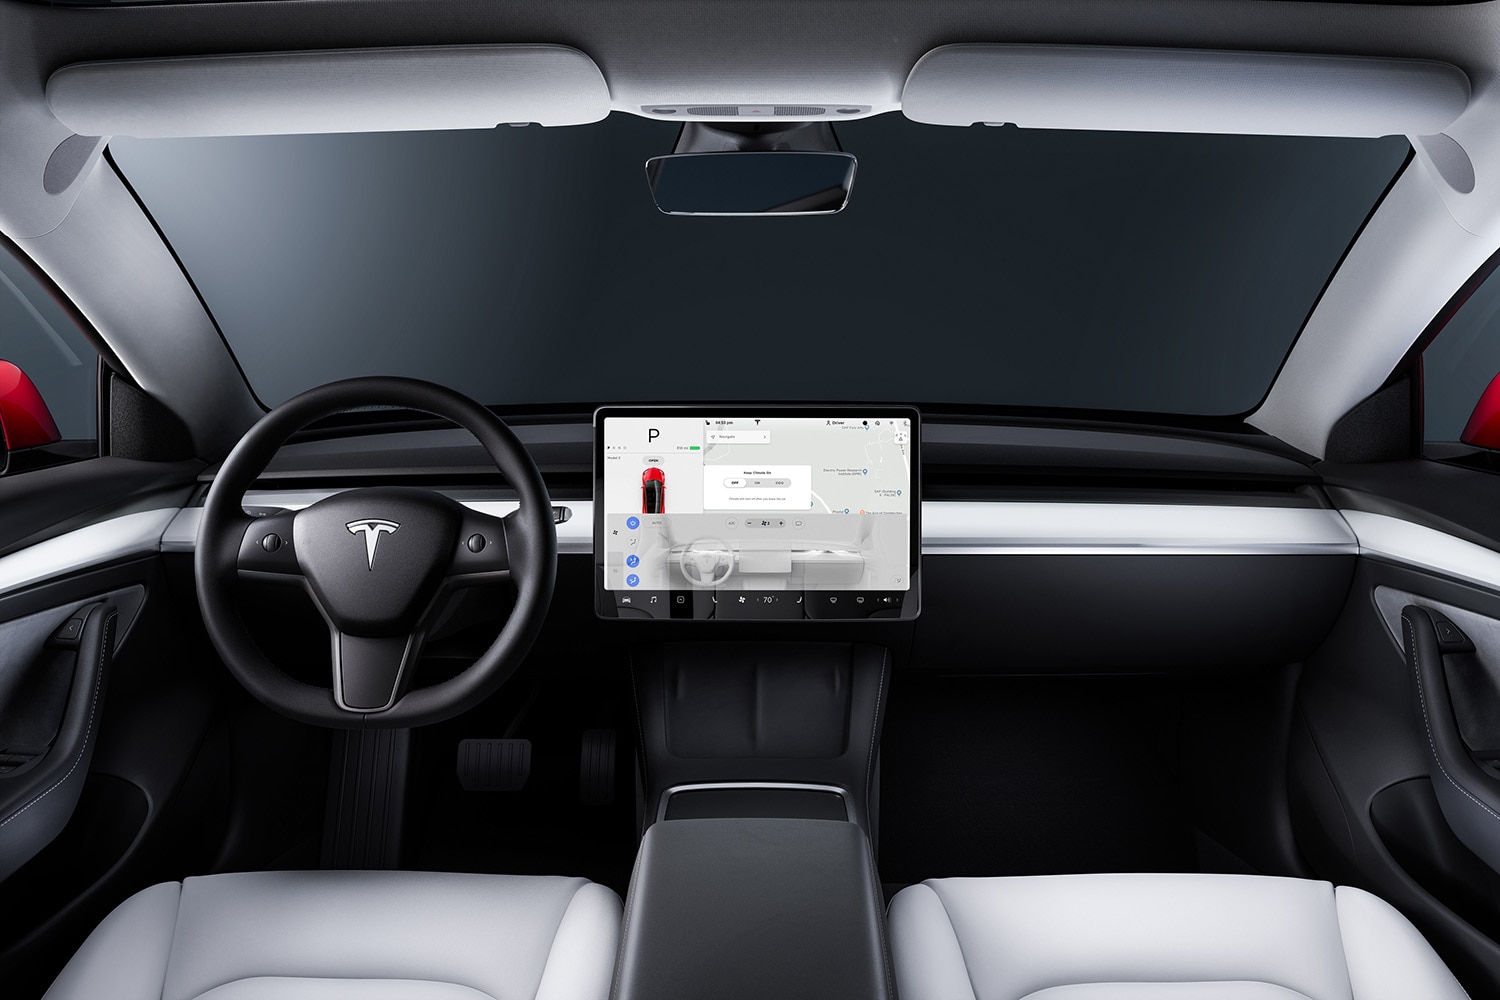 Interior front seats and infotainment system of a Tesla Model 3